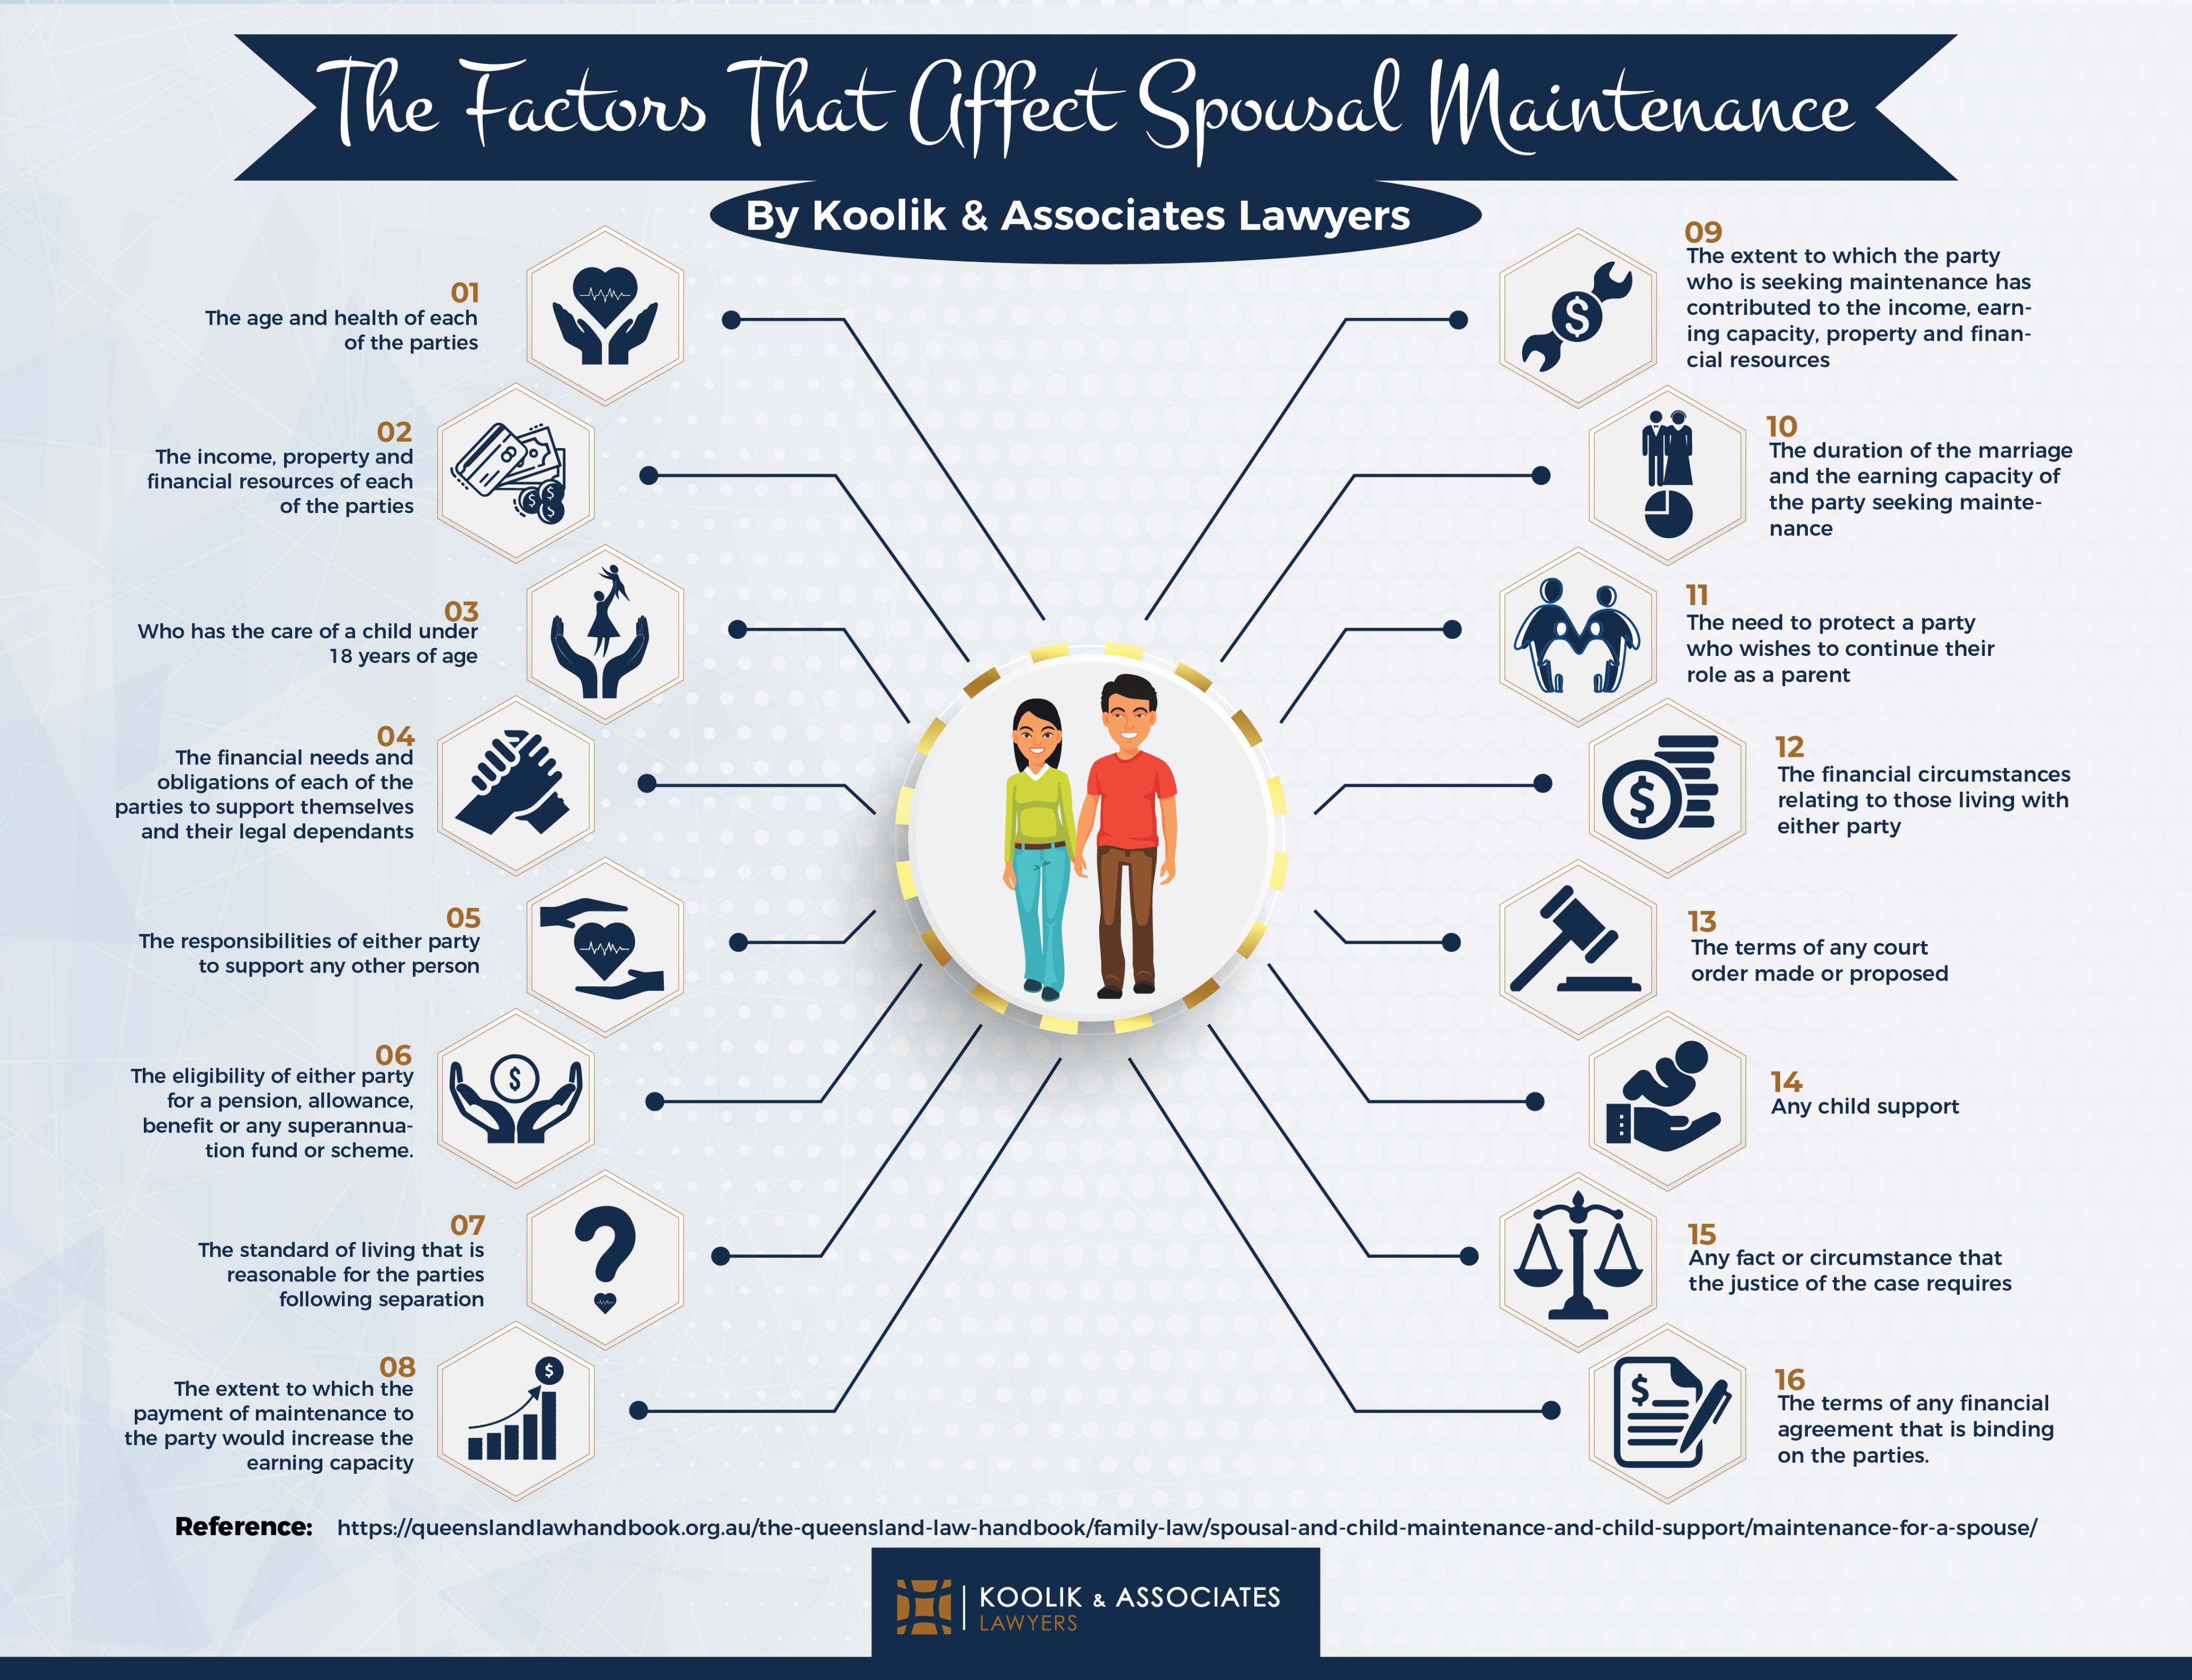 An infographic that outlines the 16 factors that affect spousal maintenance